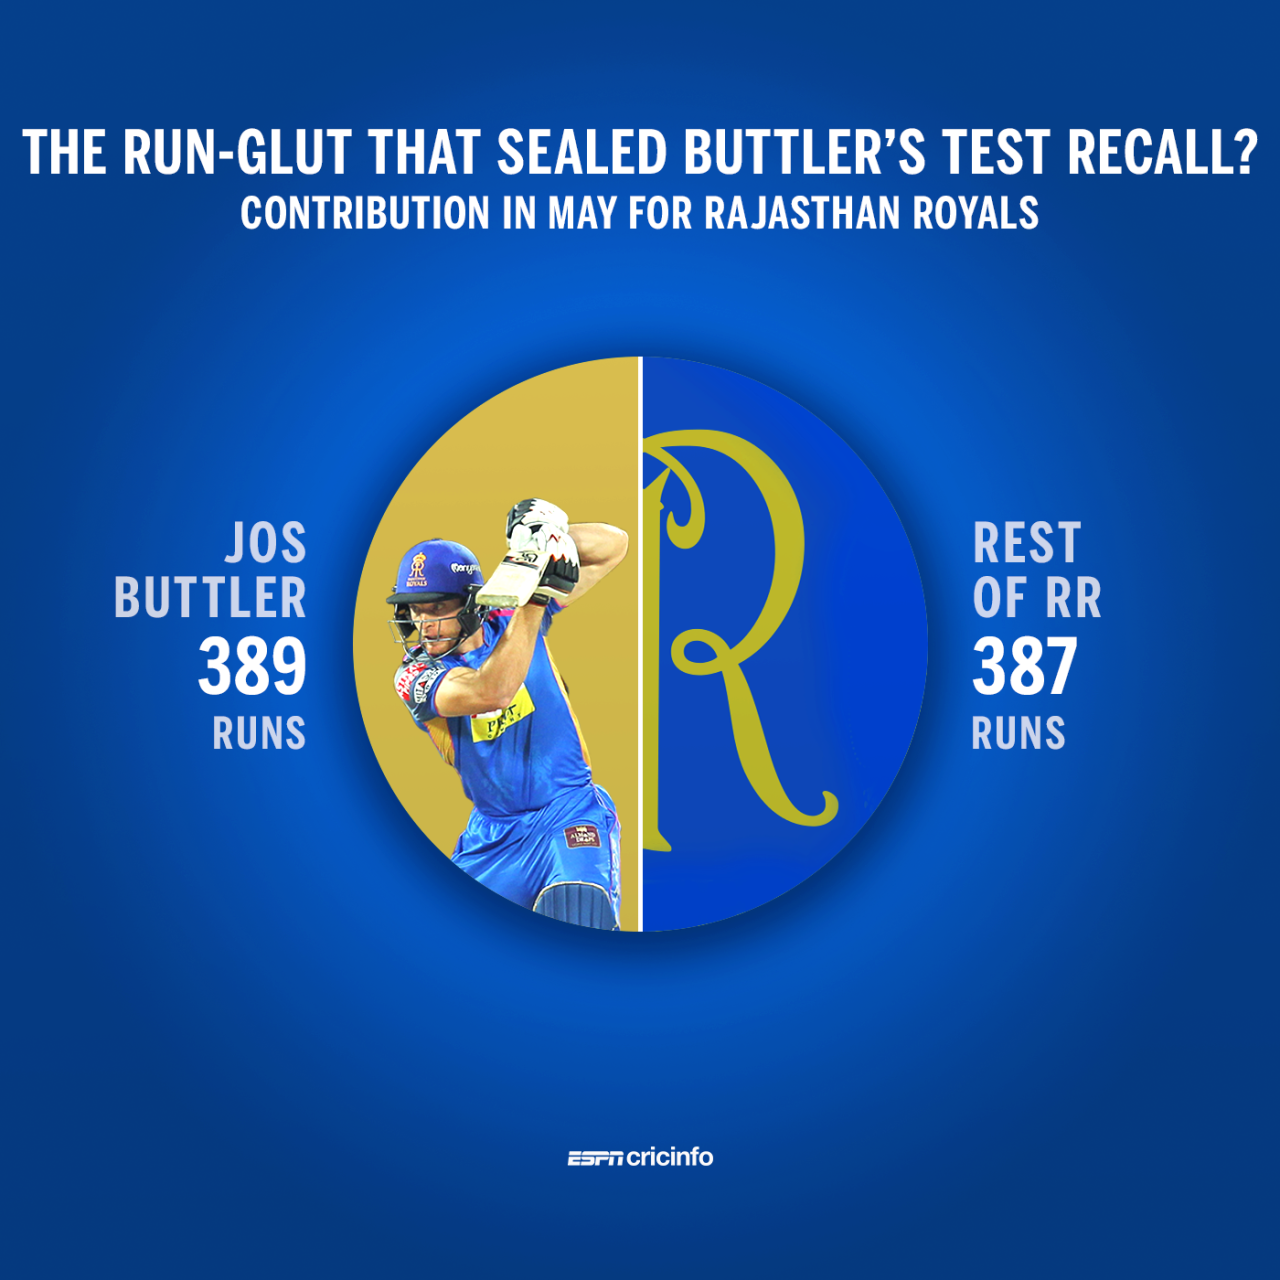 Buttler has outperformed the rest of his IPL side in May